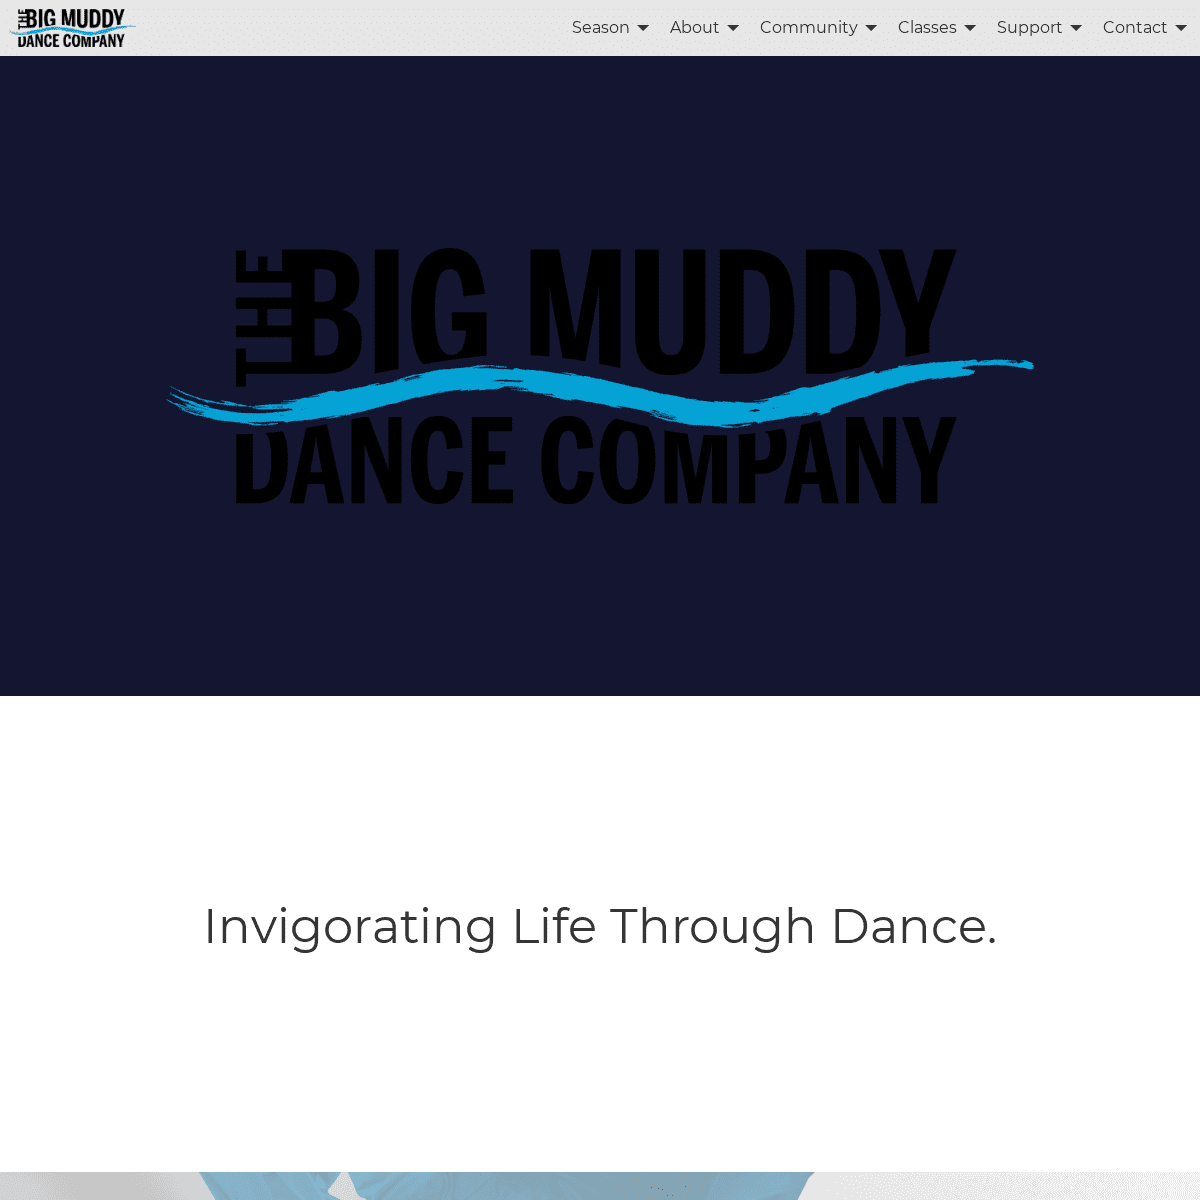 A complete backup of thebigmuddydanceco.org